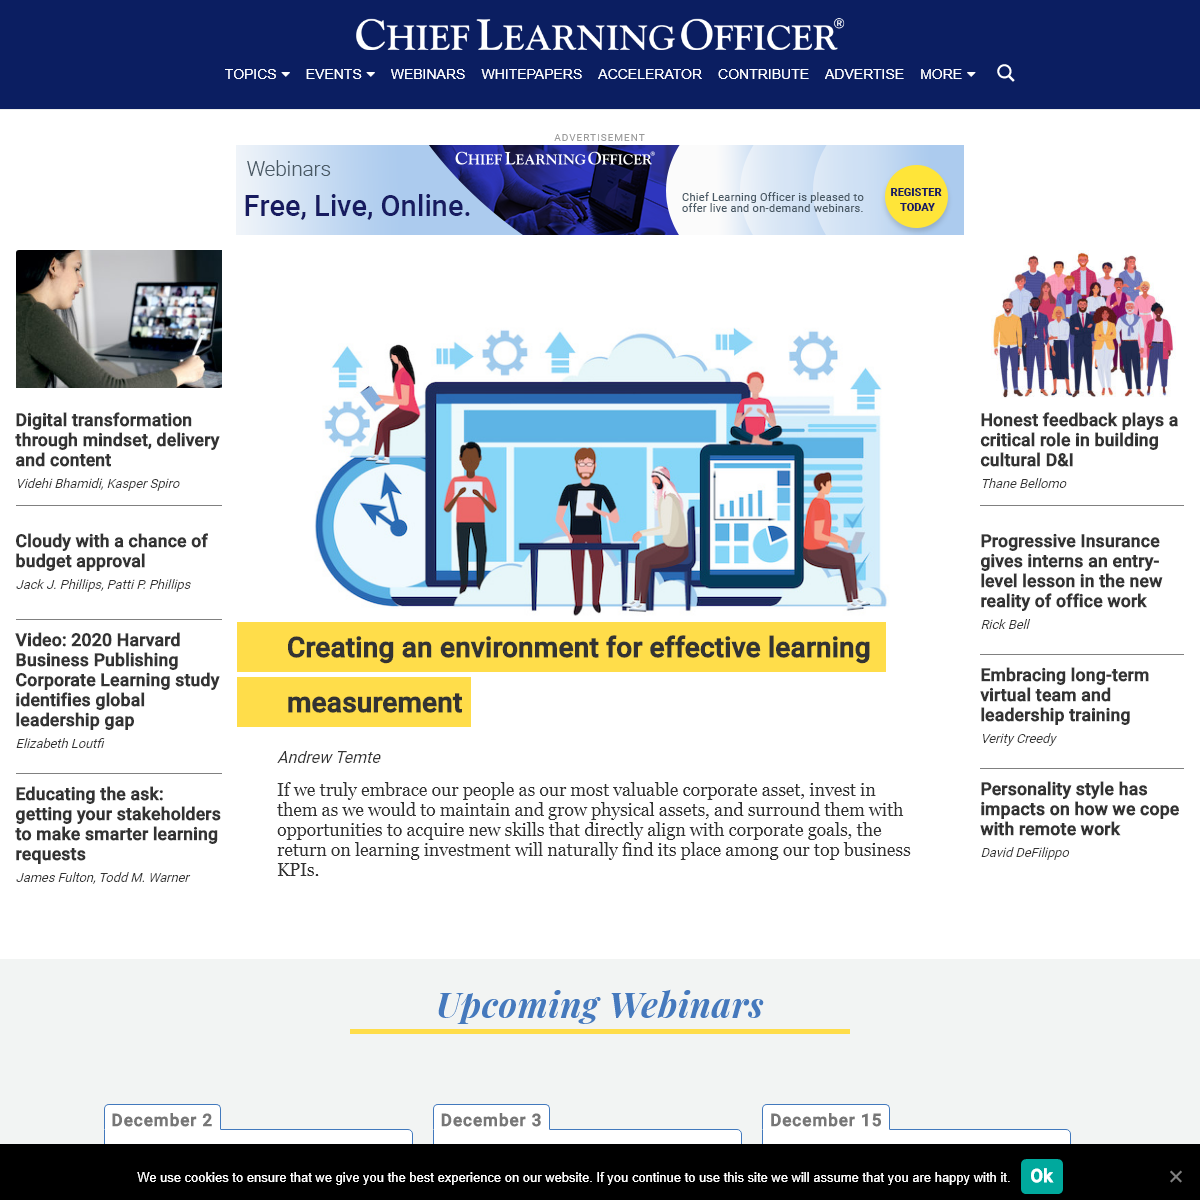 A complete backup of chieflearningofficer.com